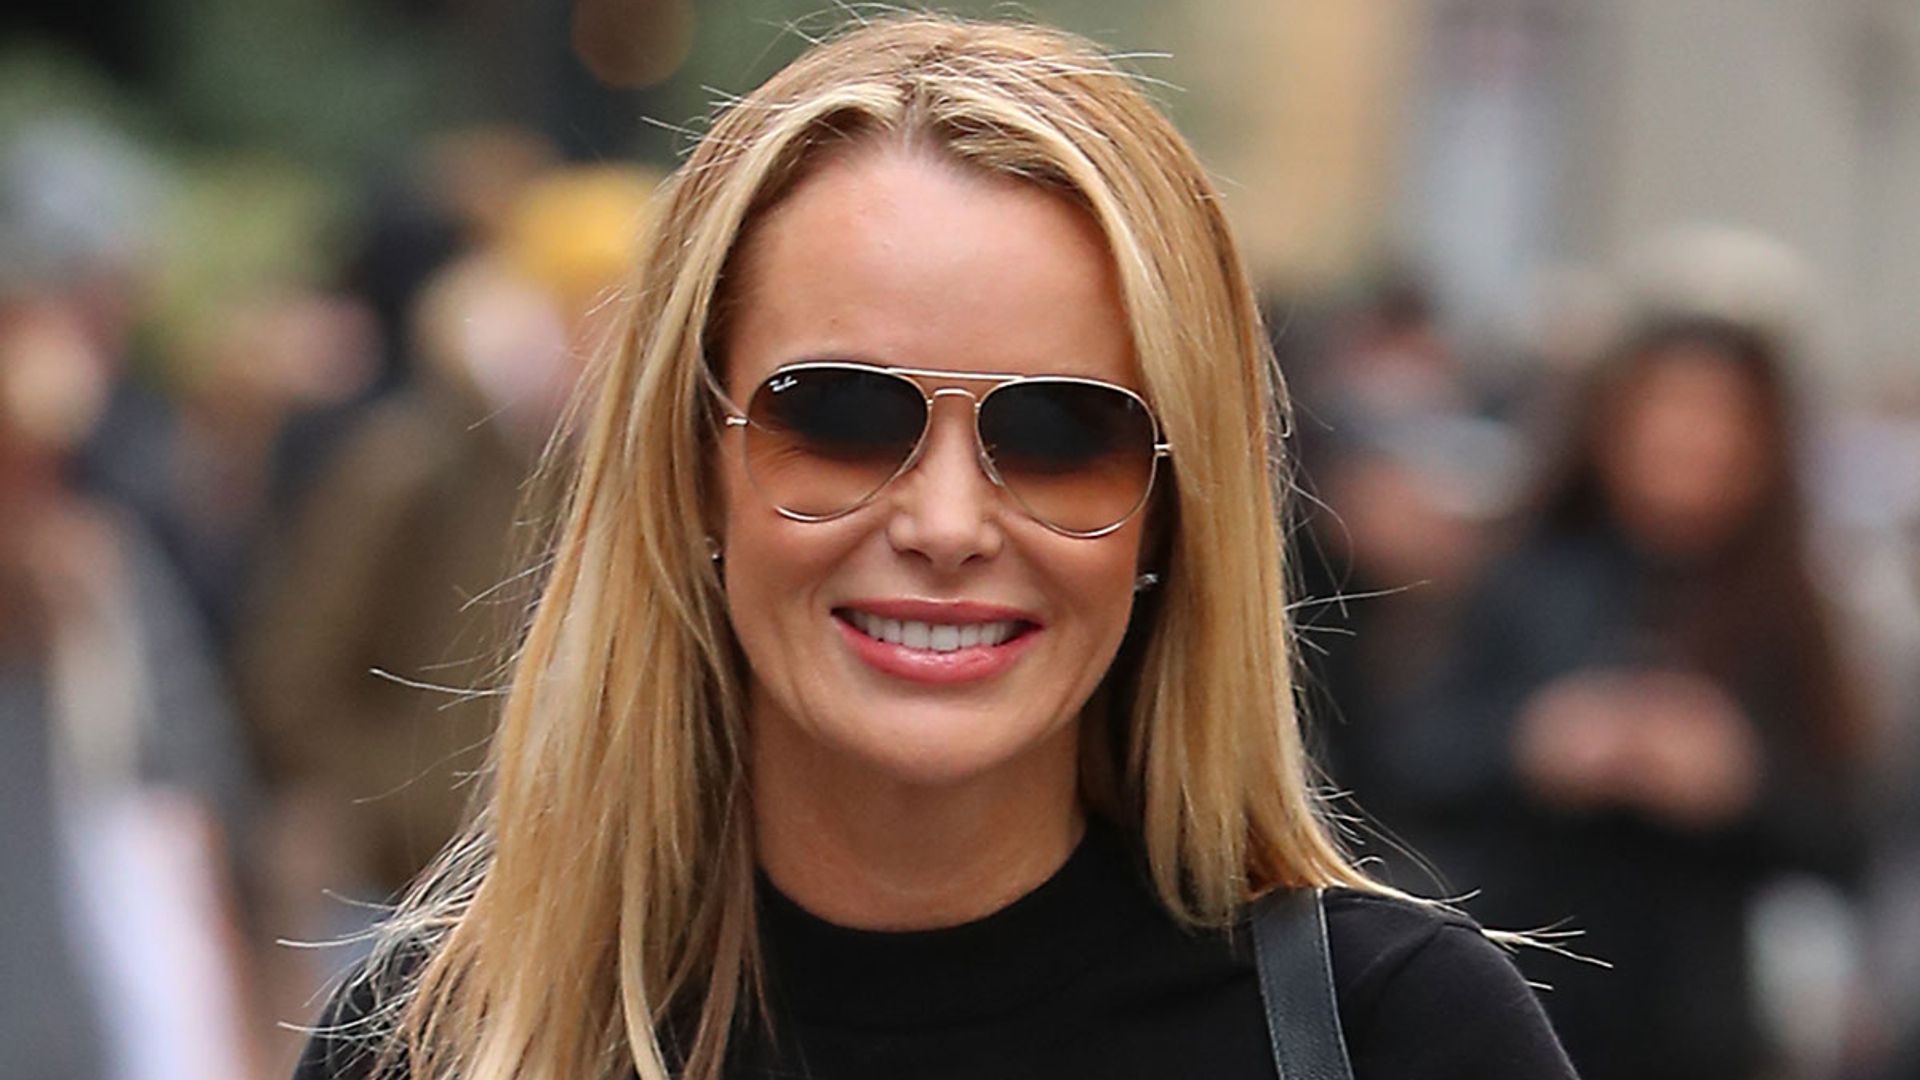 Amanda Holden's skinny jeans and new hair do are BIG news on Instagram ...